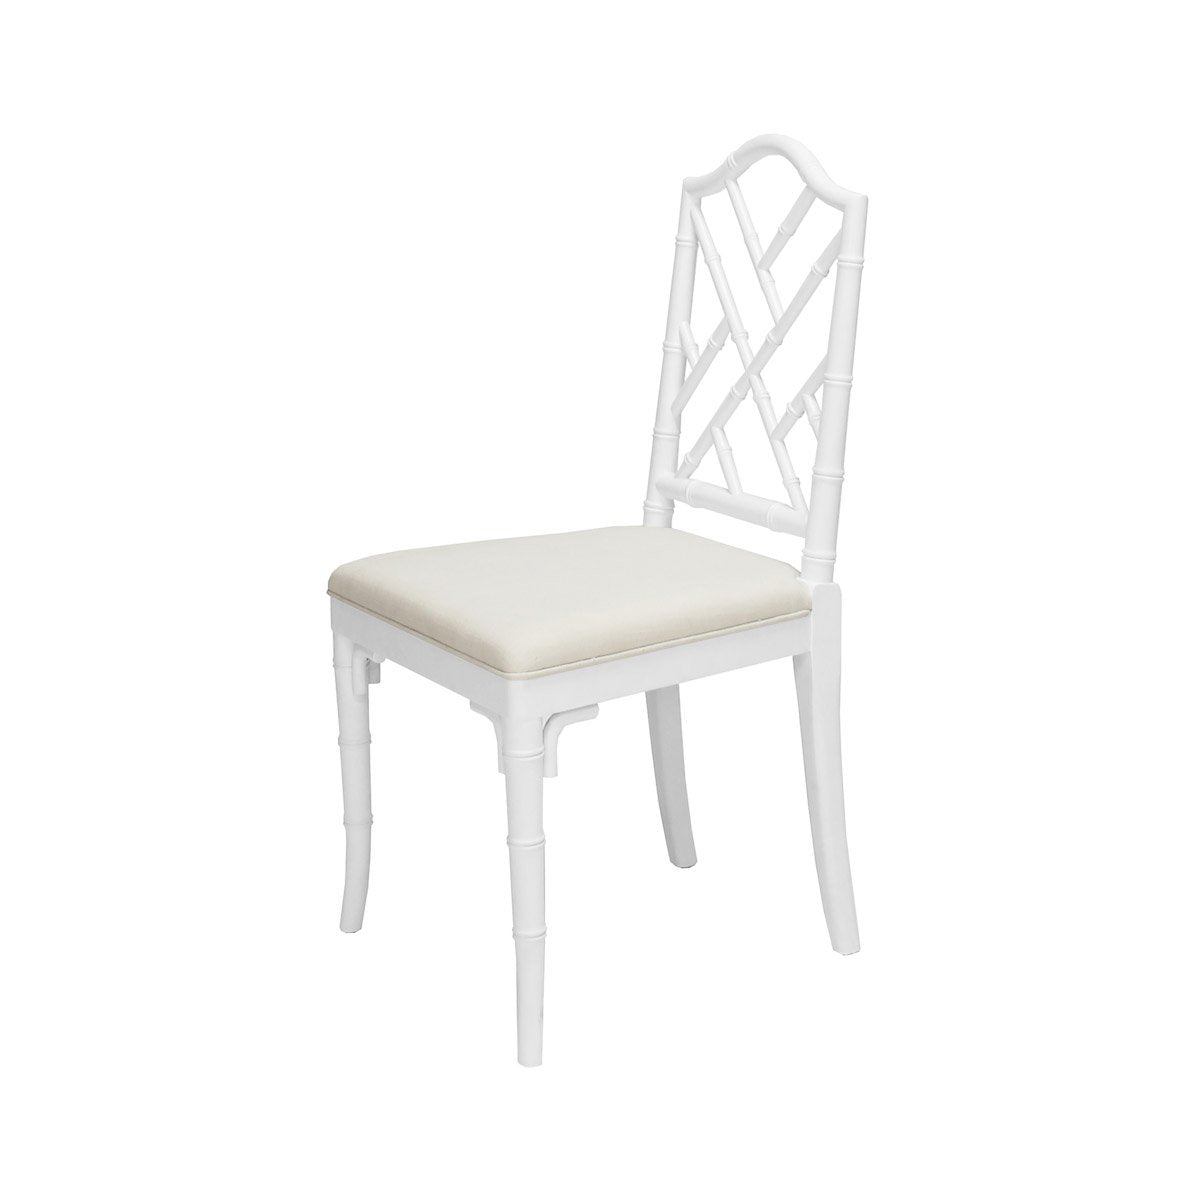 Chippendale Dining Chair Matte White Lacquer | White Linen. Front view.